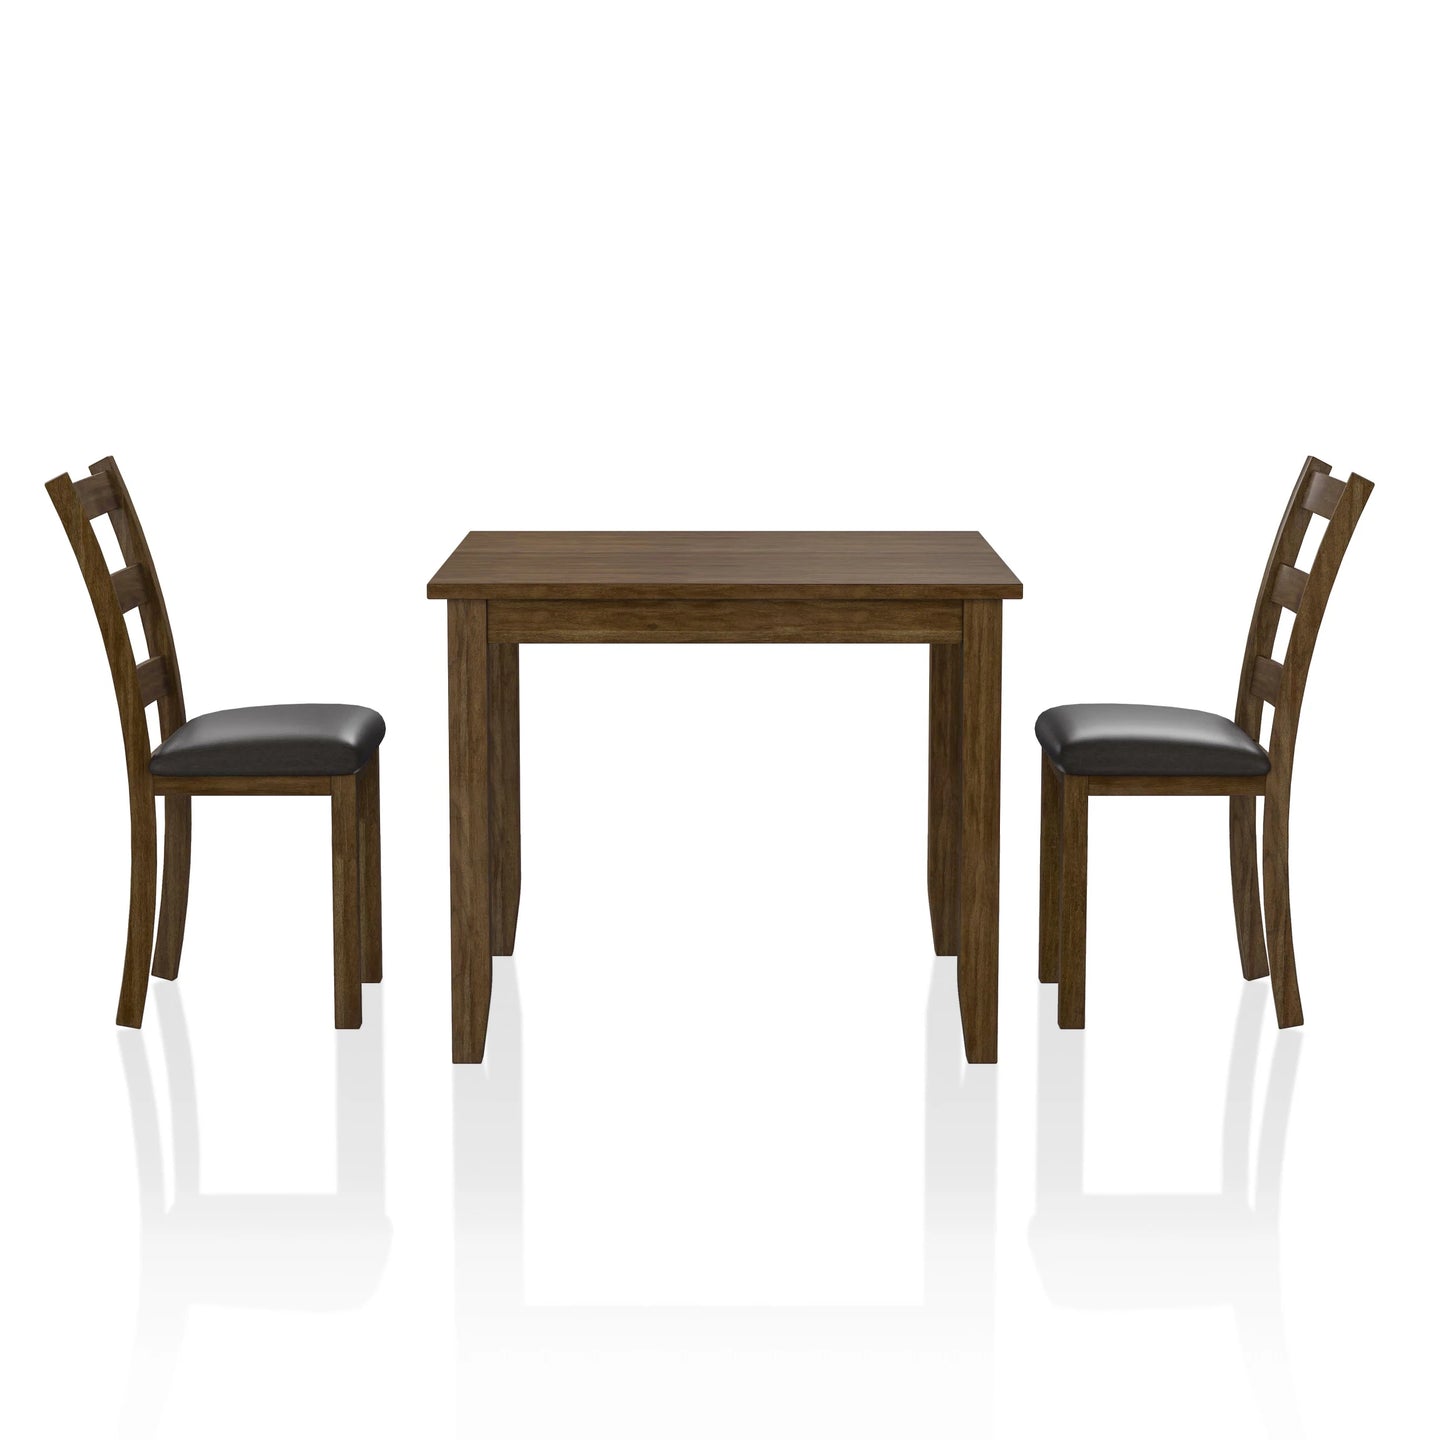 Furniture of America Chesterton 3-Piece Dining Table Set - IDF-3770T-3PK